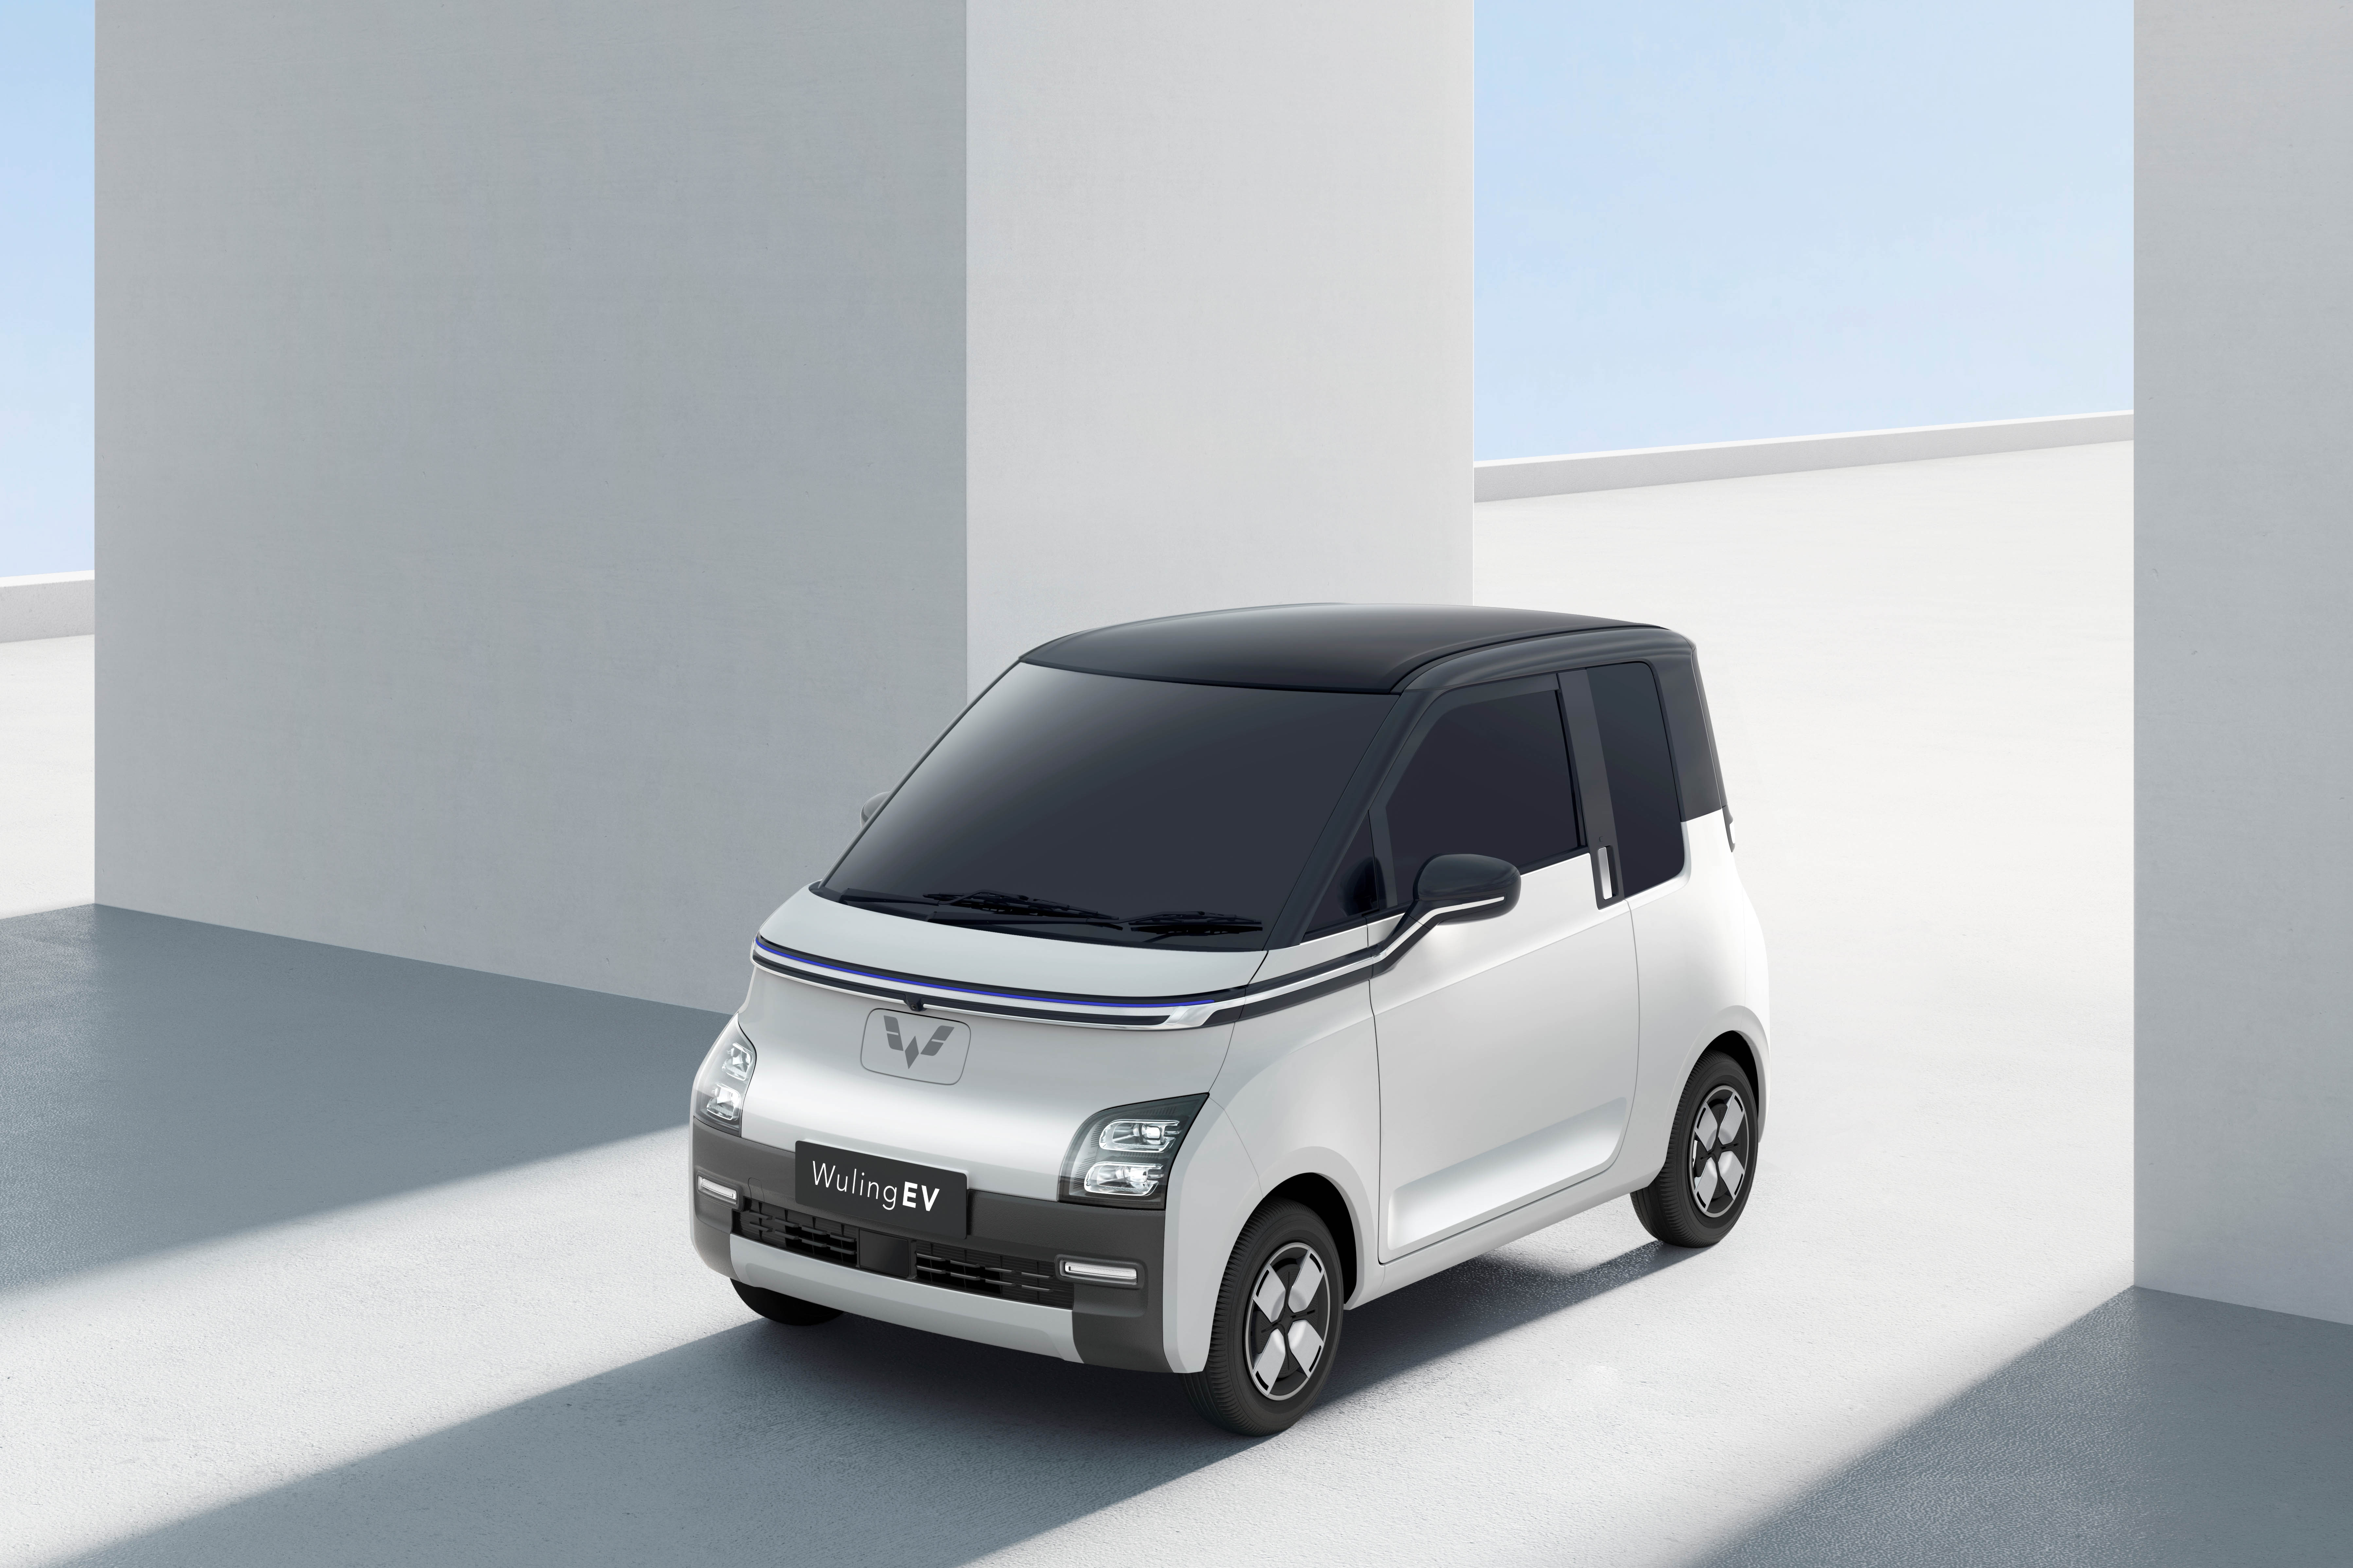 Image Wuling Applies Future-Tech Design on the Exterior of Its Electric Vehicle